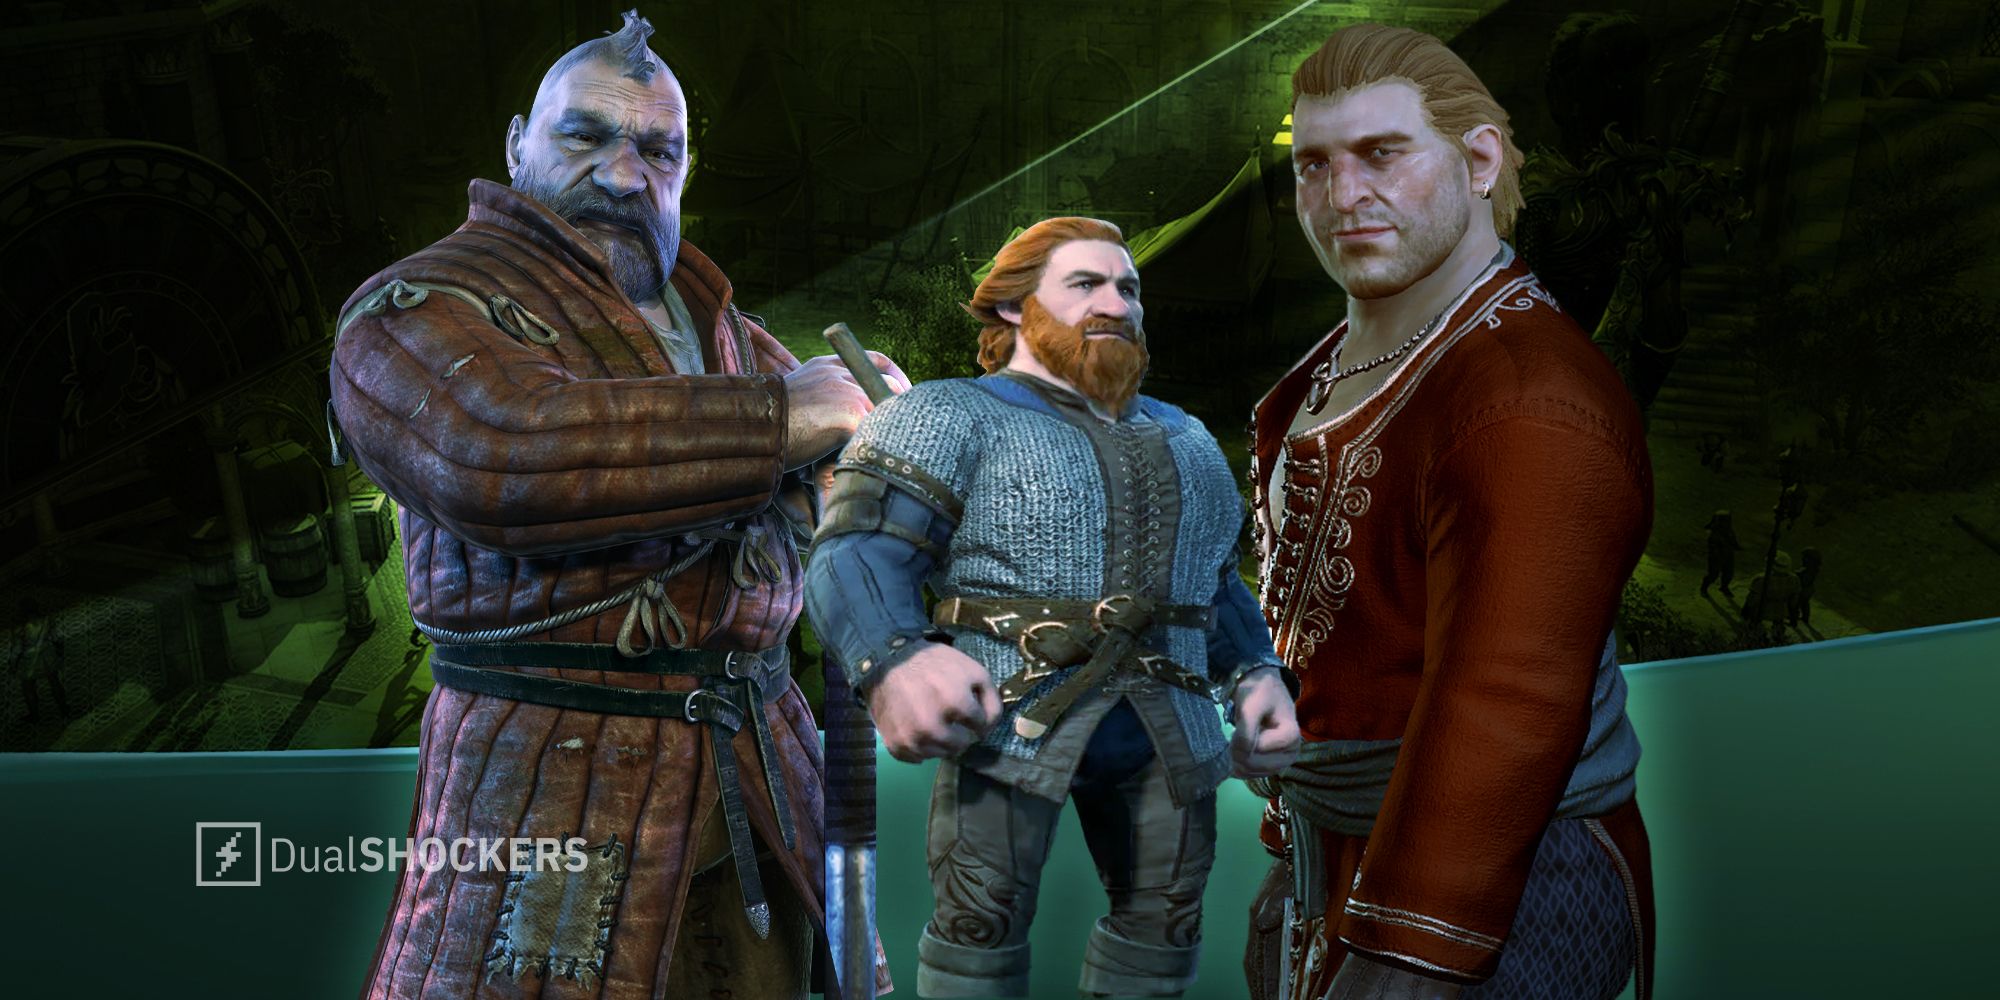 Zoltan from The Witcher, Dwarf Fighter from Baldur's Gate 3, Varric from Dragon Age